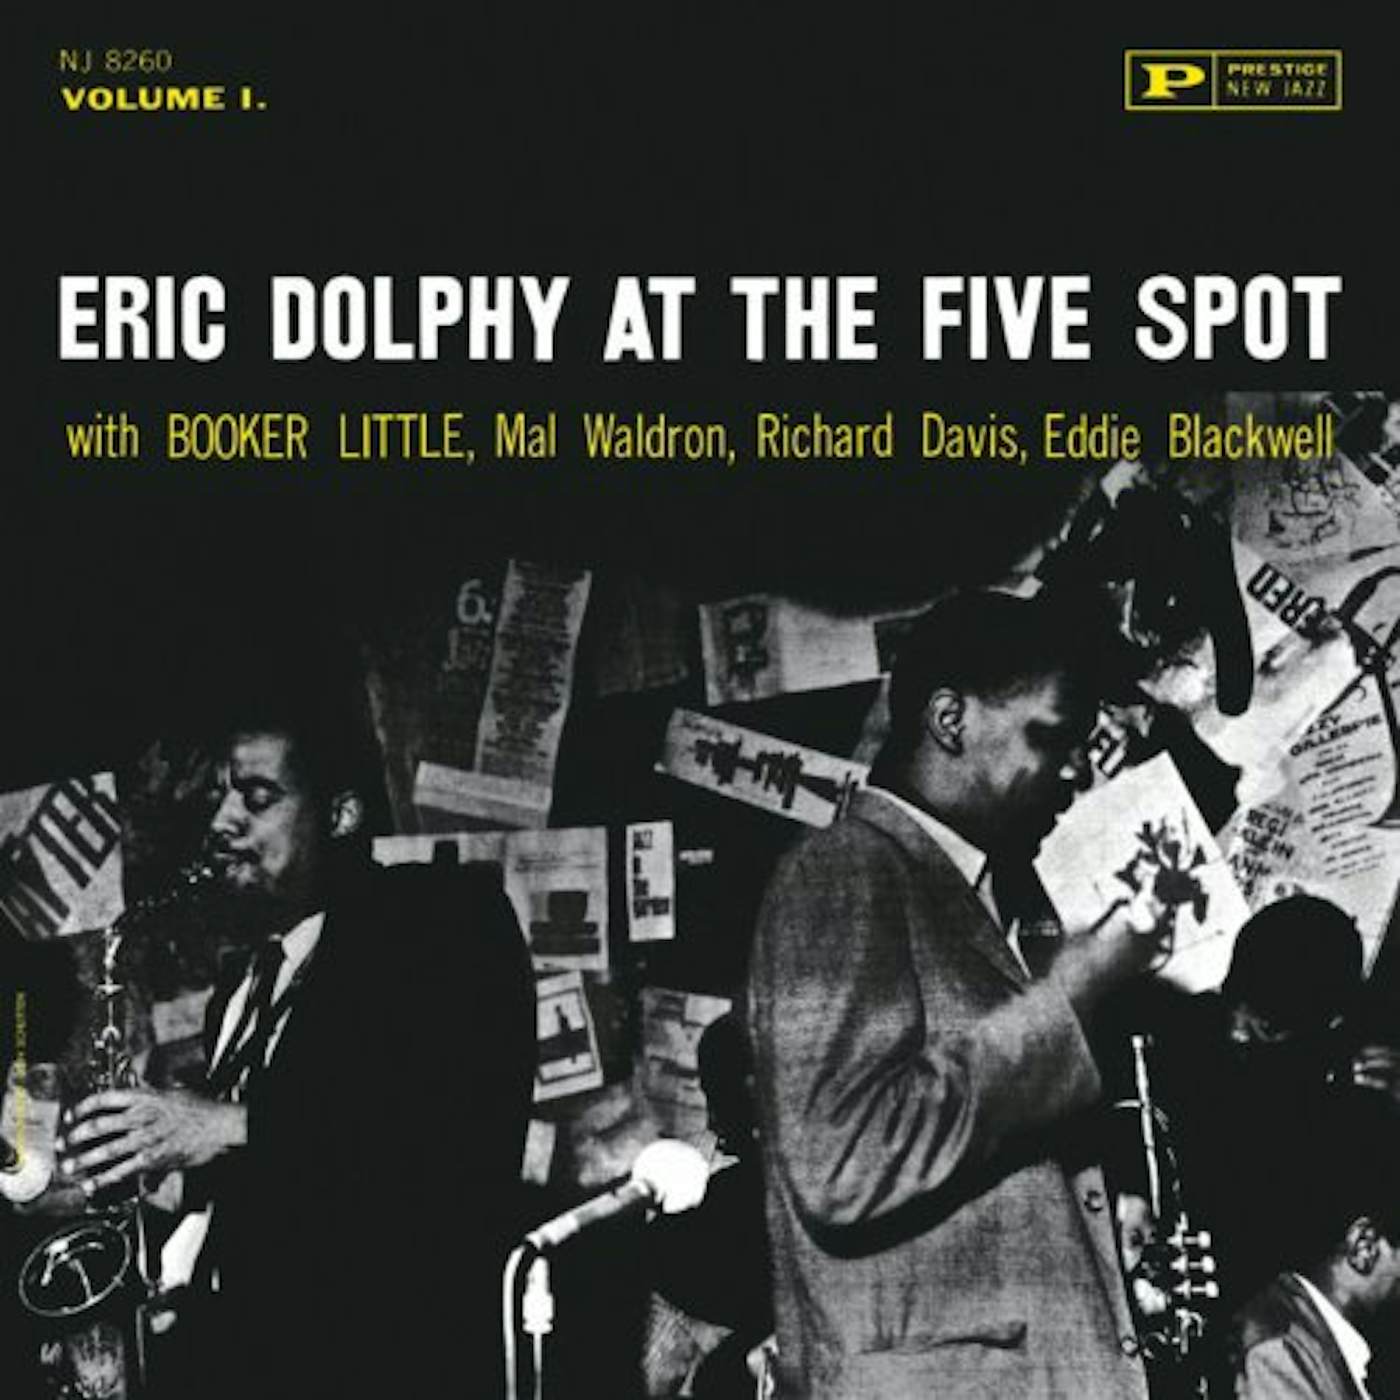 Eric Dolphy AT THE FIVE SPOT 1 Vinyl Record